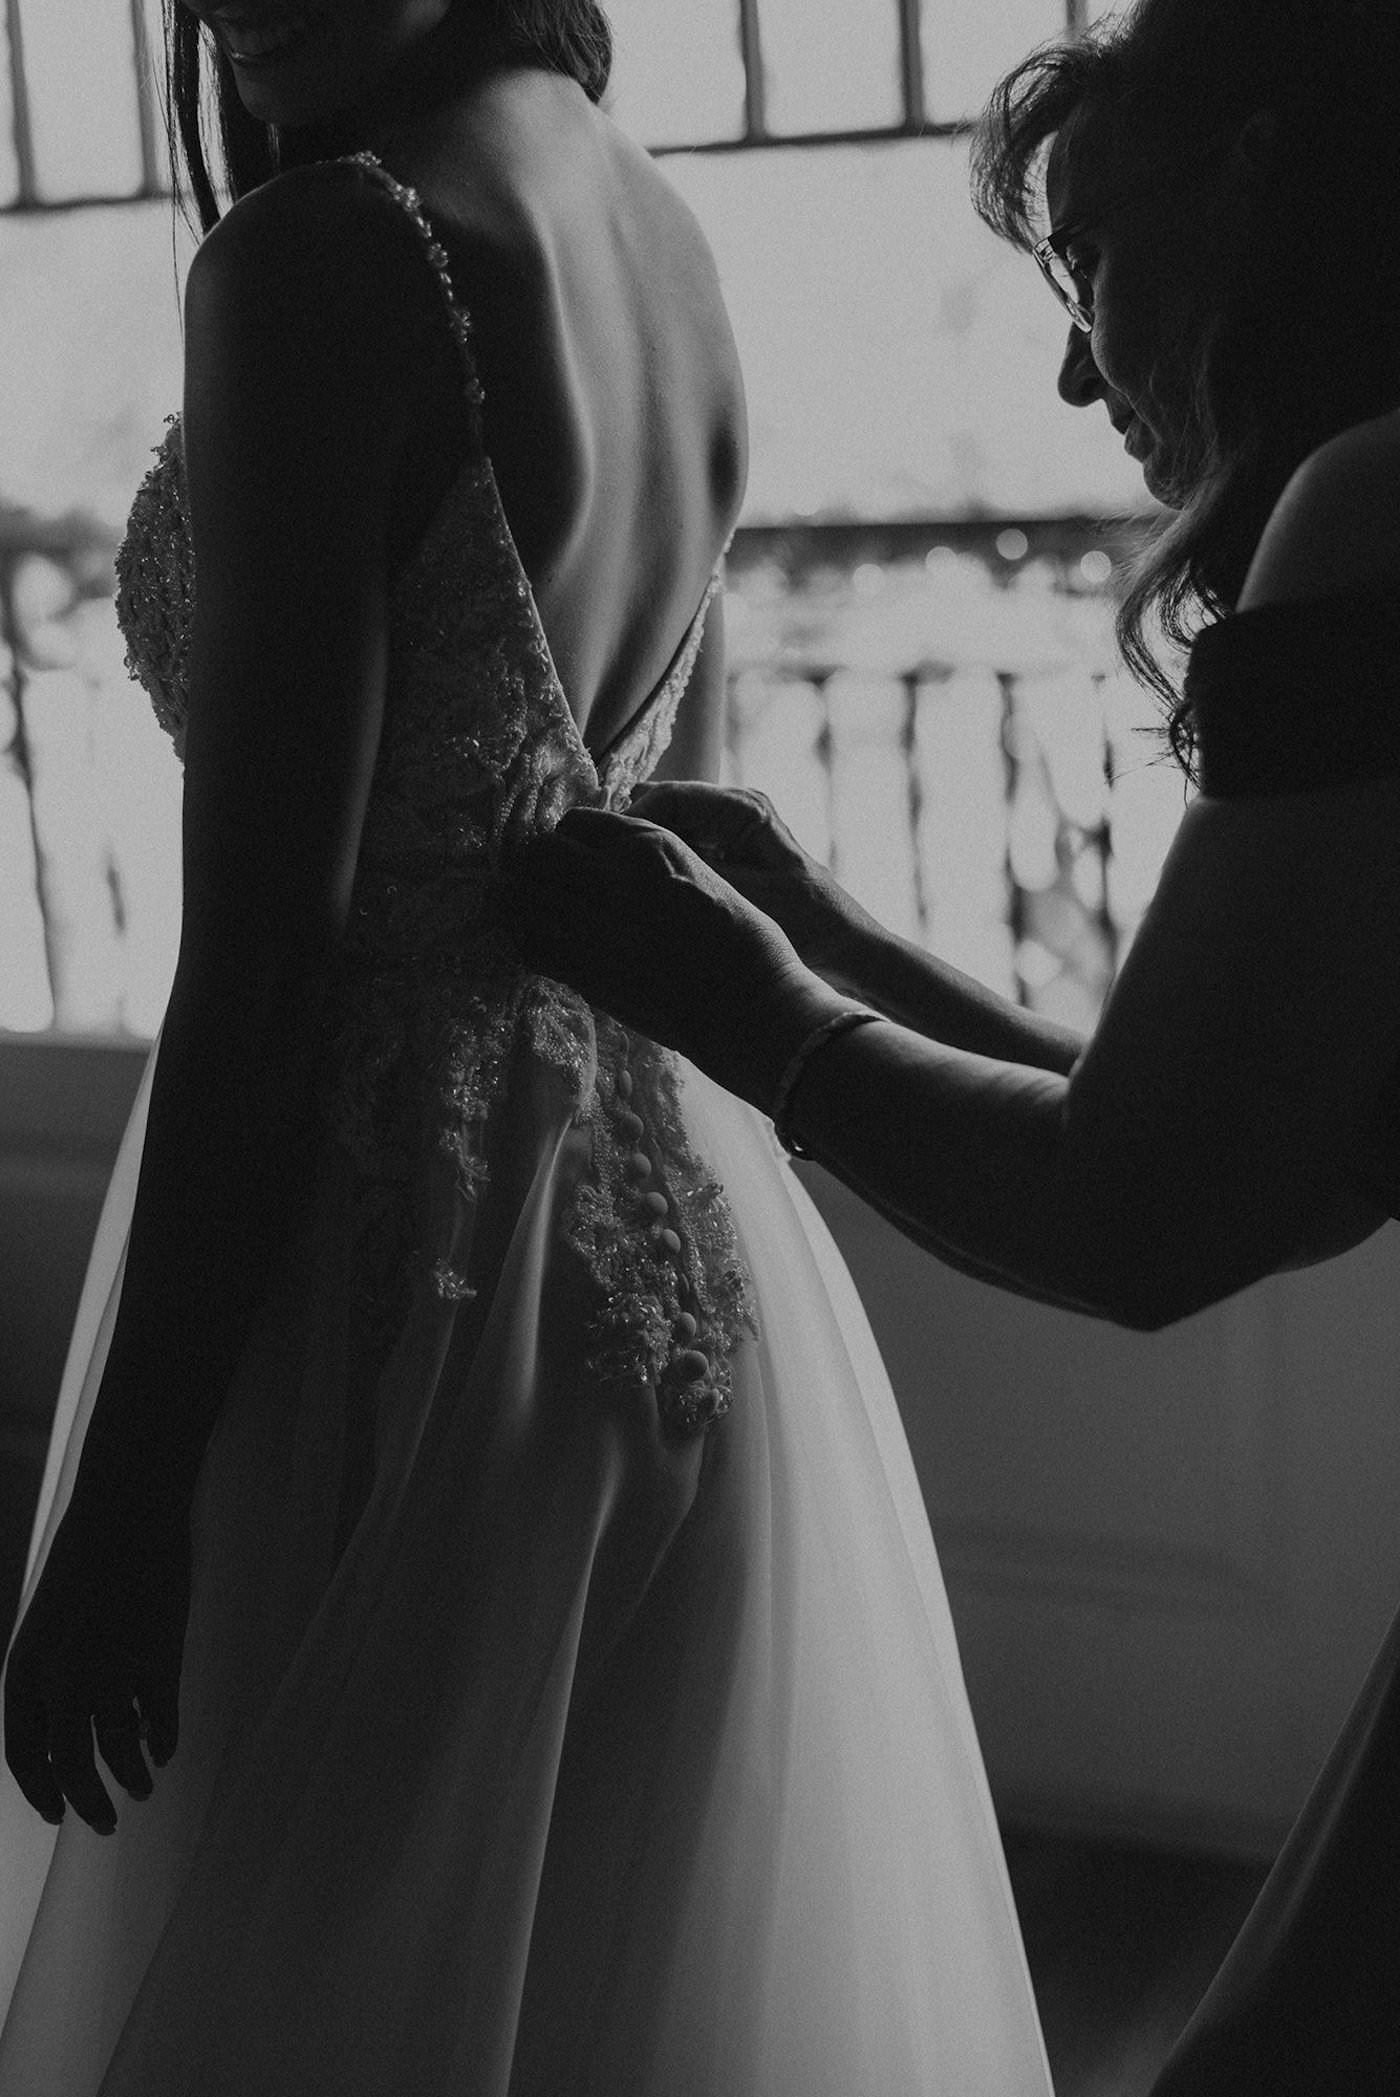 Mom Helping Bride Get Dressed and Ready | Black and White Wedding Photography Shot